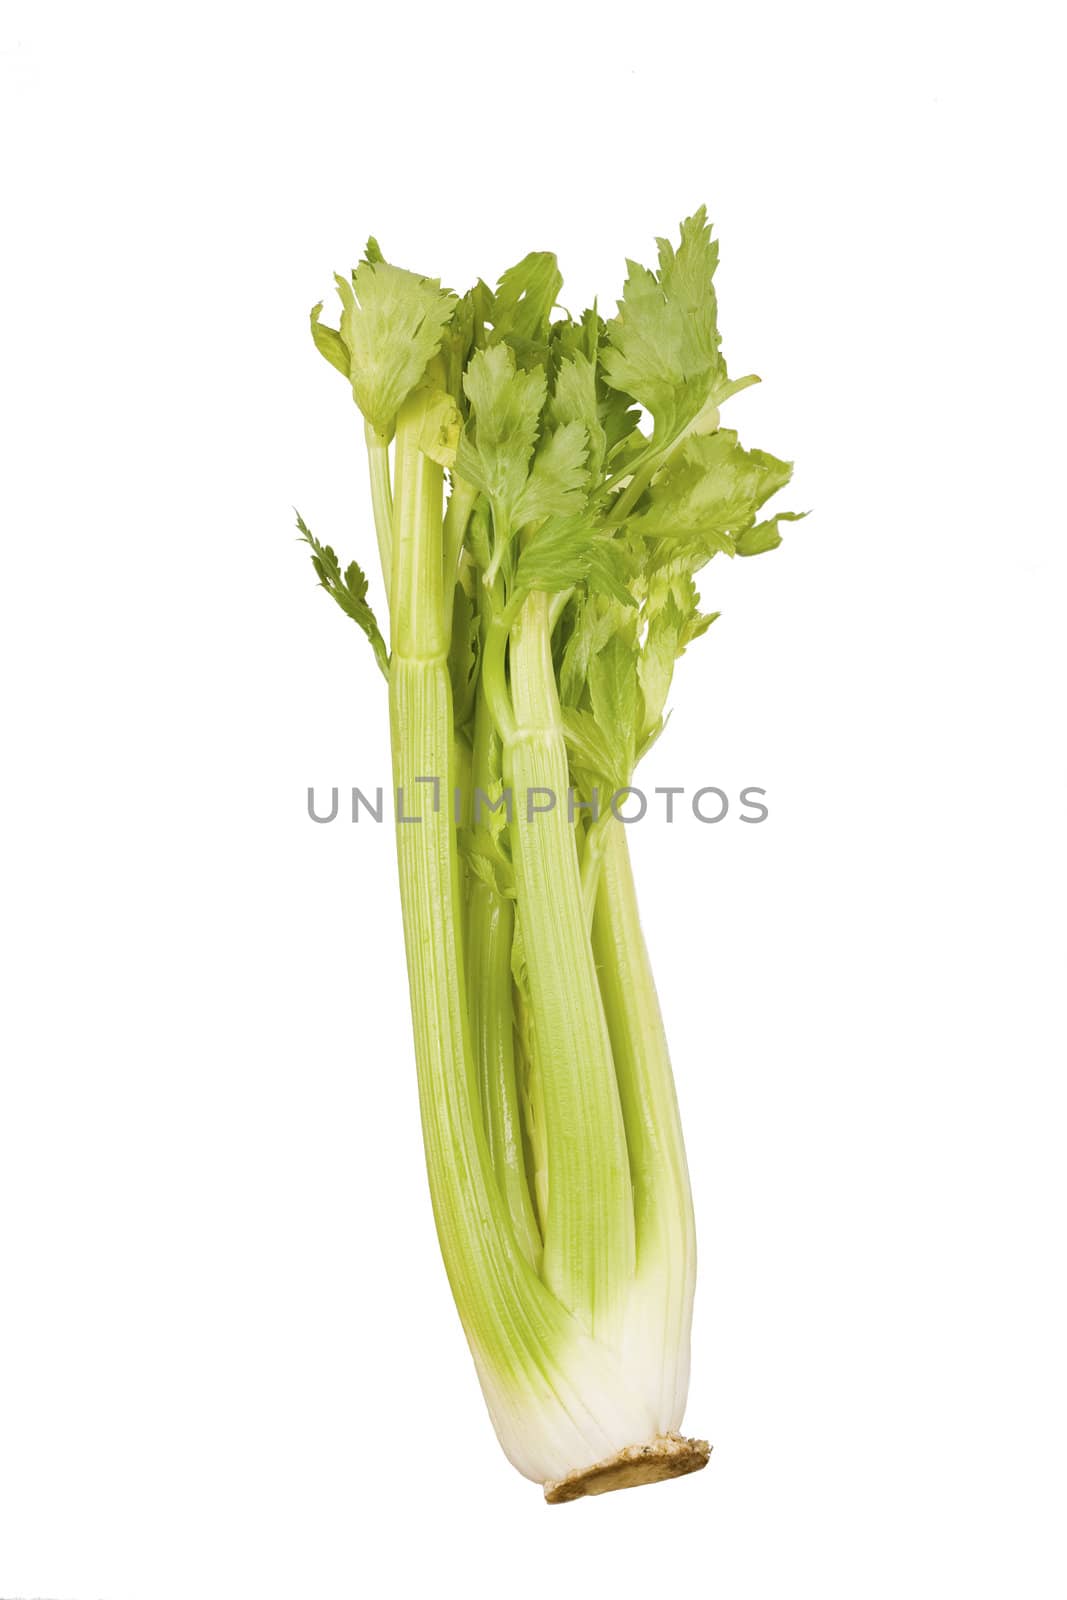 Stalk of green celery isolated on white